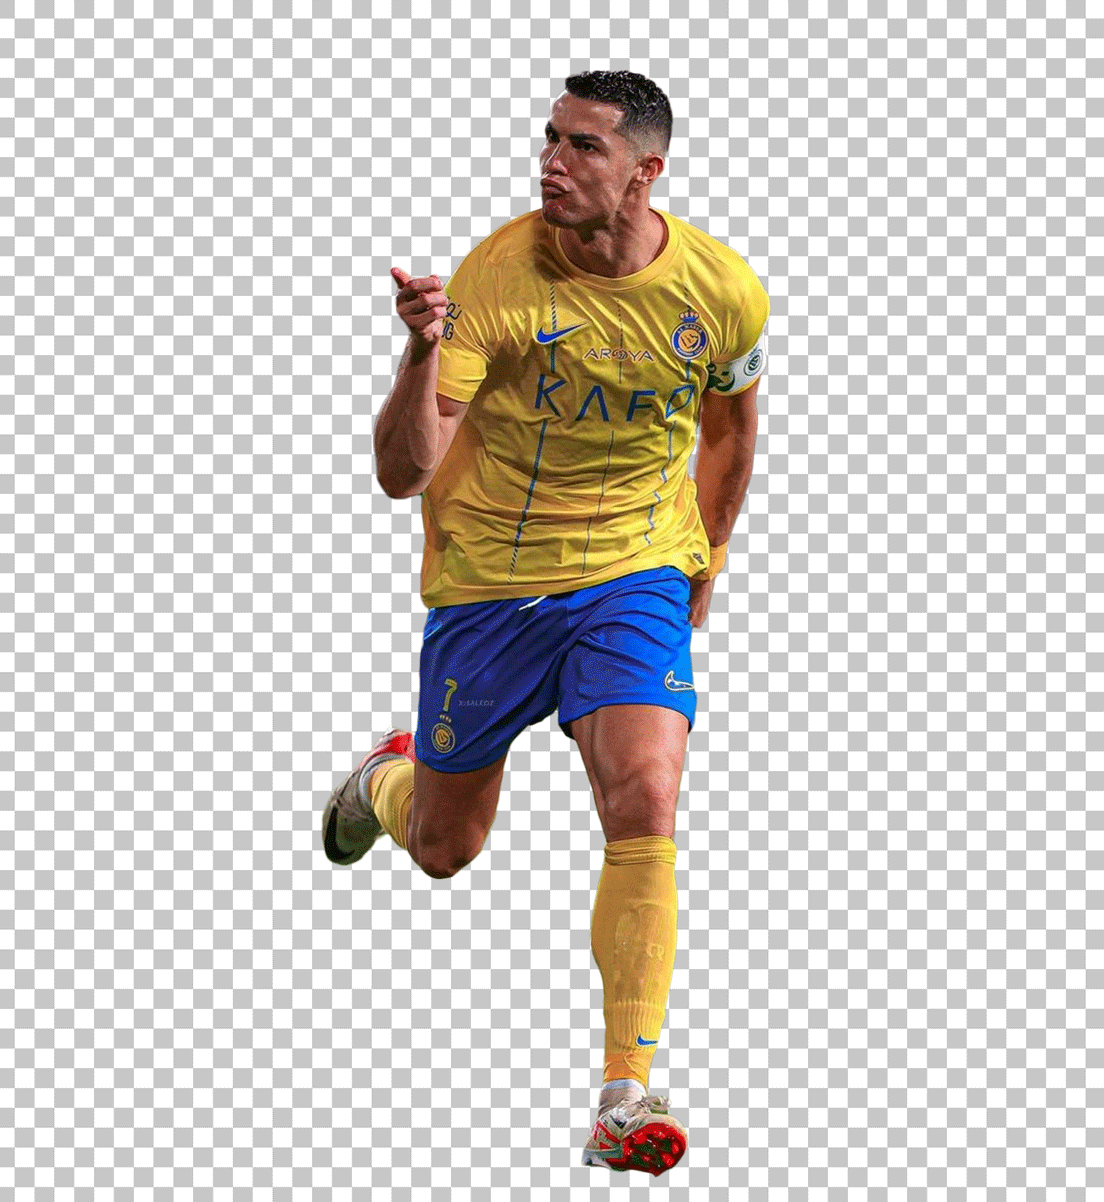 Cristiano Ronaldo is pointing while running PNG image